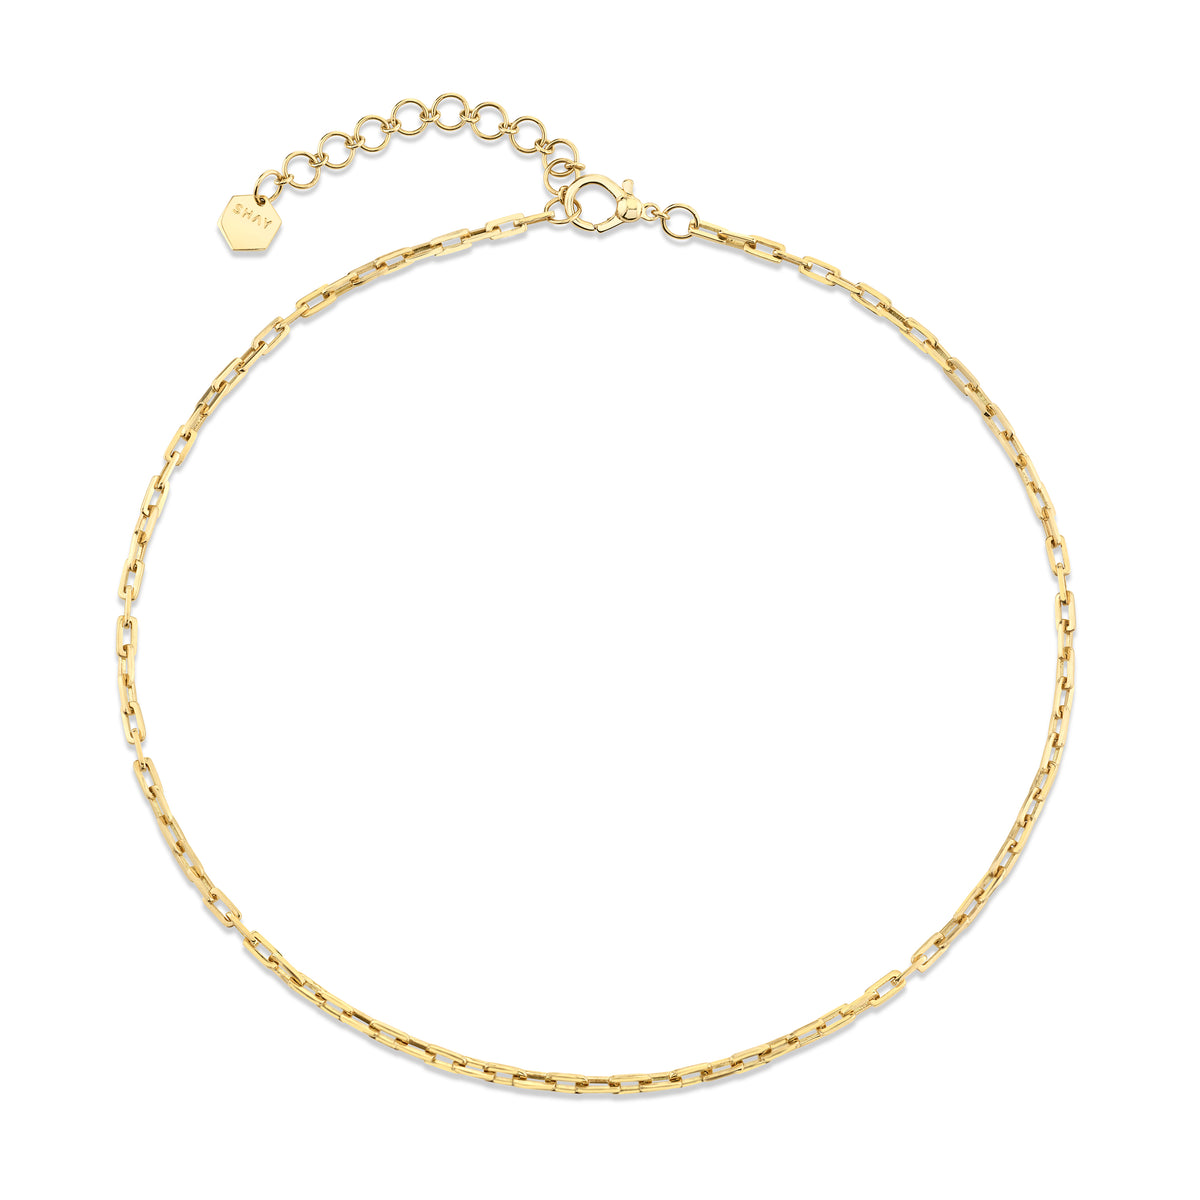 READY TO SHIP SOLID GOLD BABY DECO LINK NECKLACE